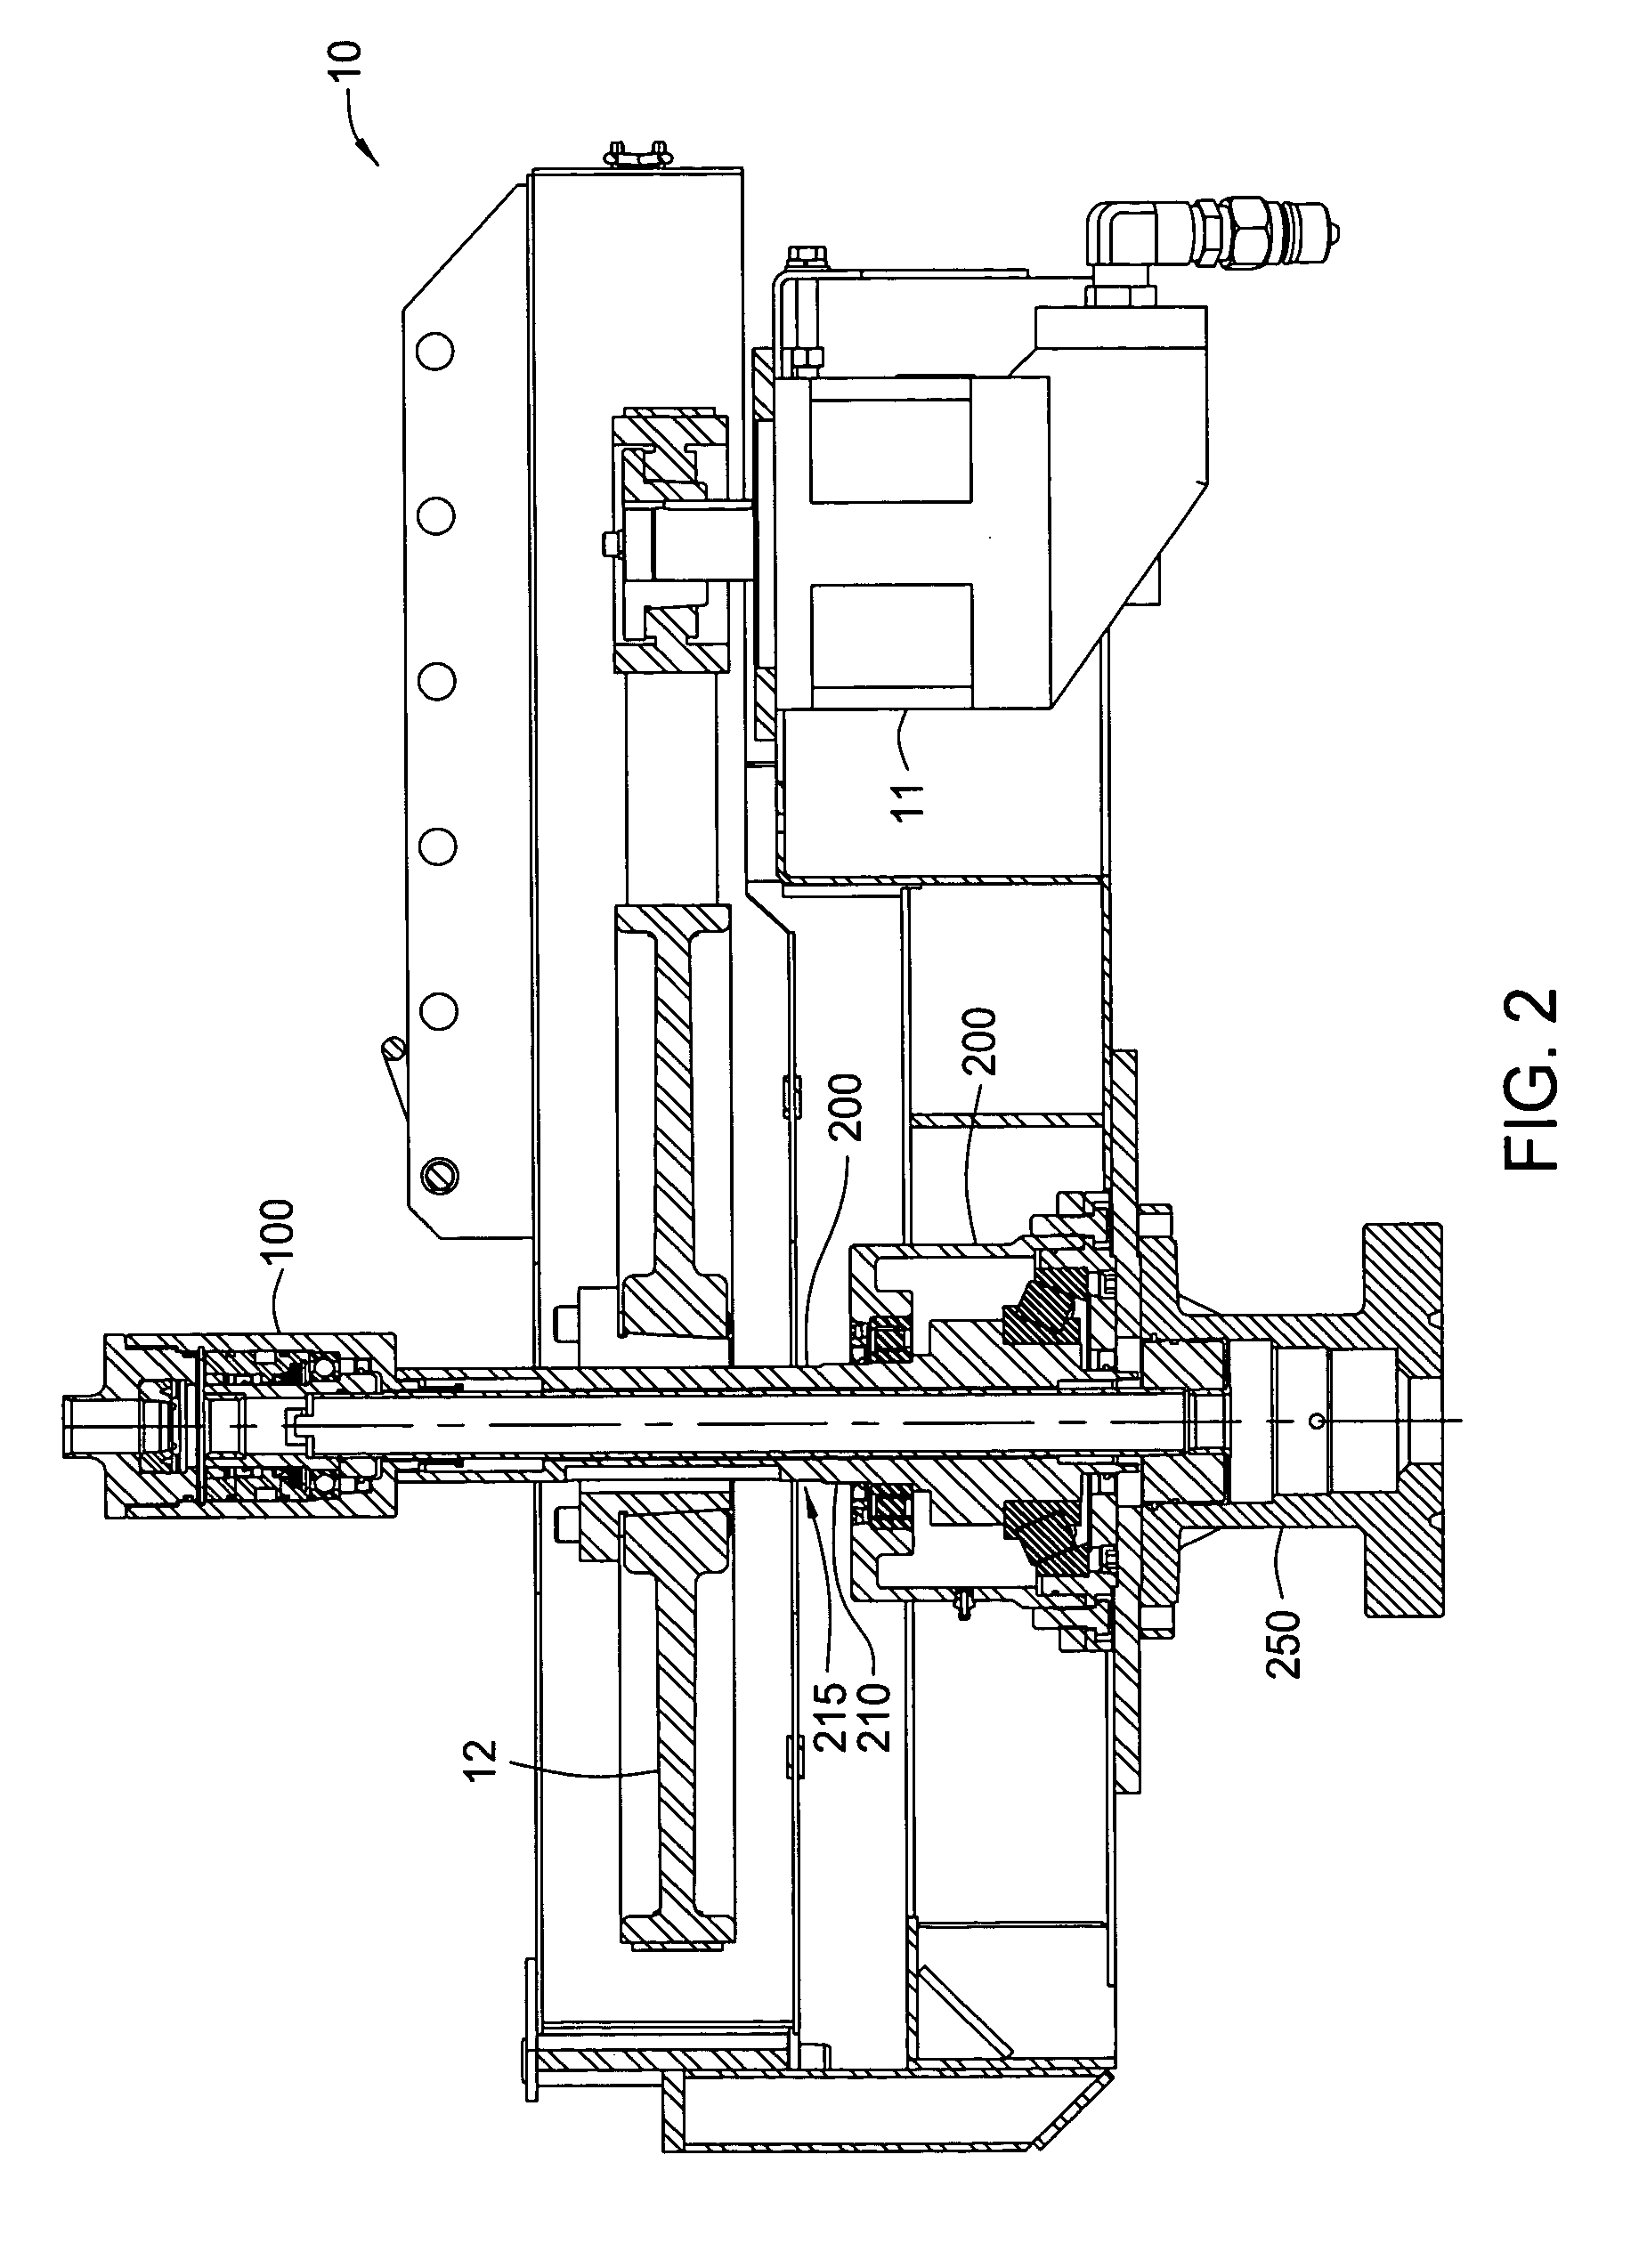 Rotating stuffing box with split standpipe